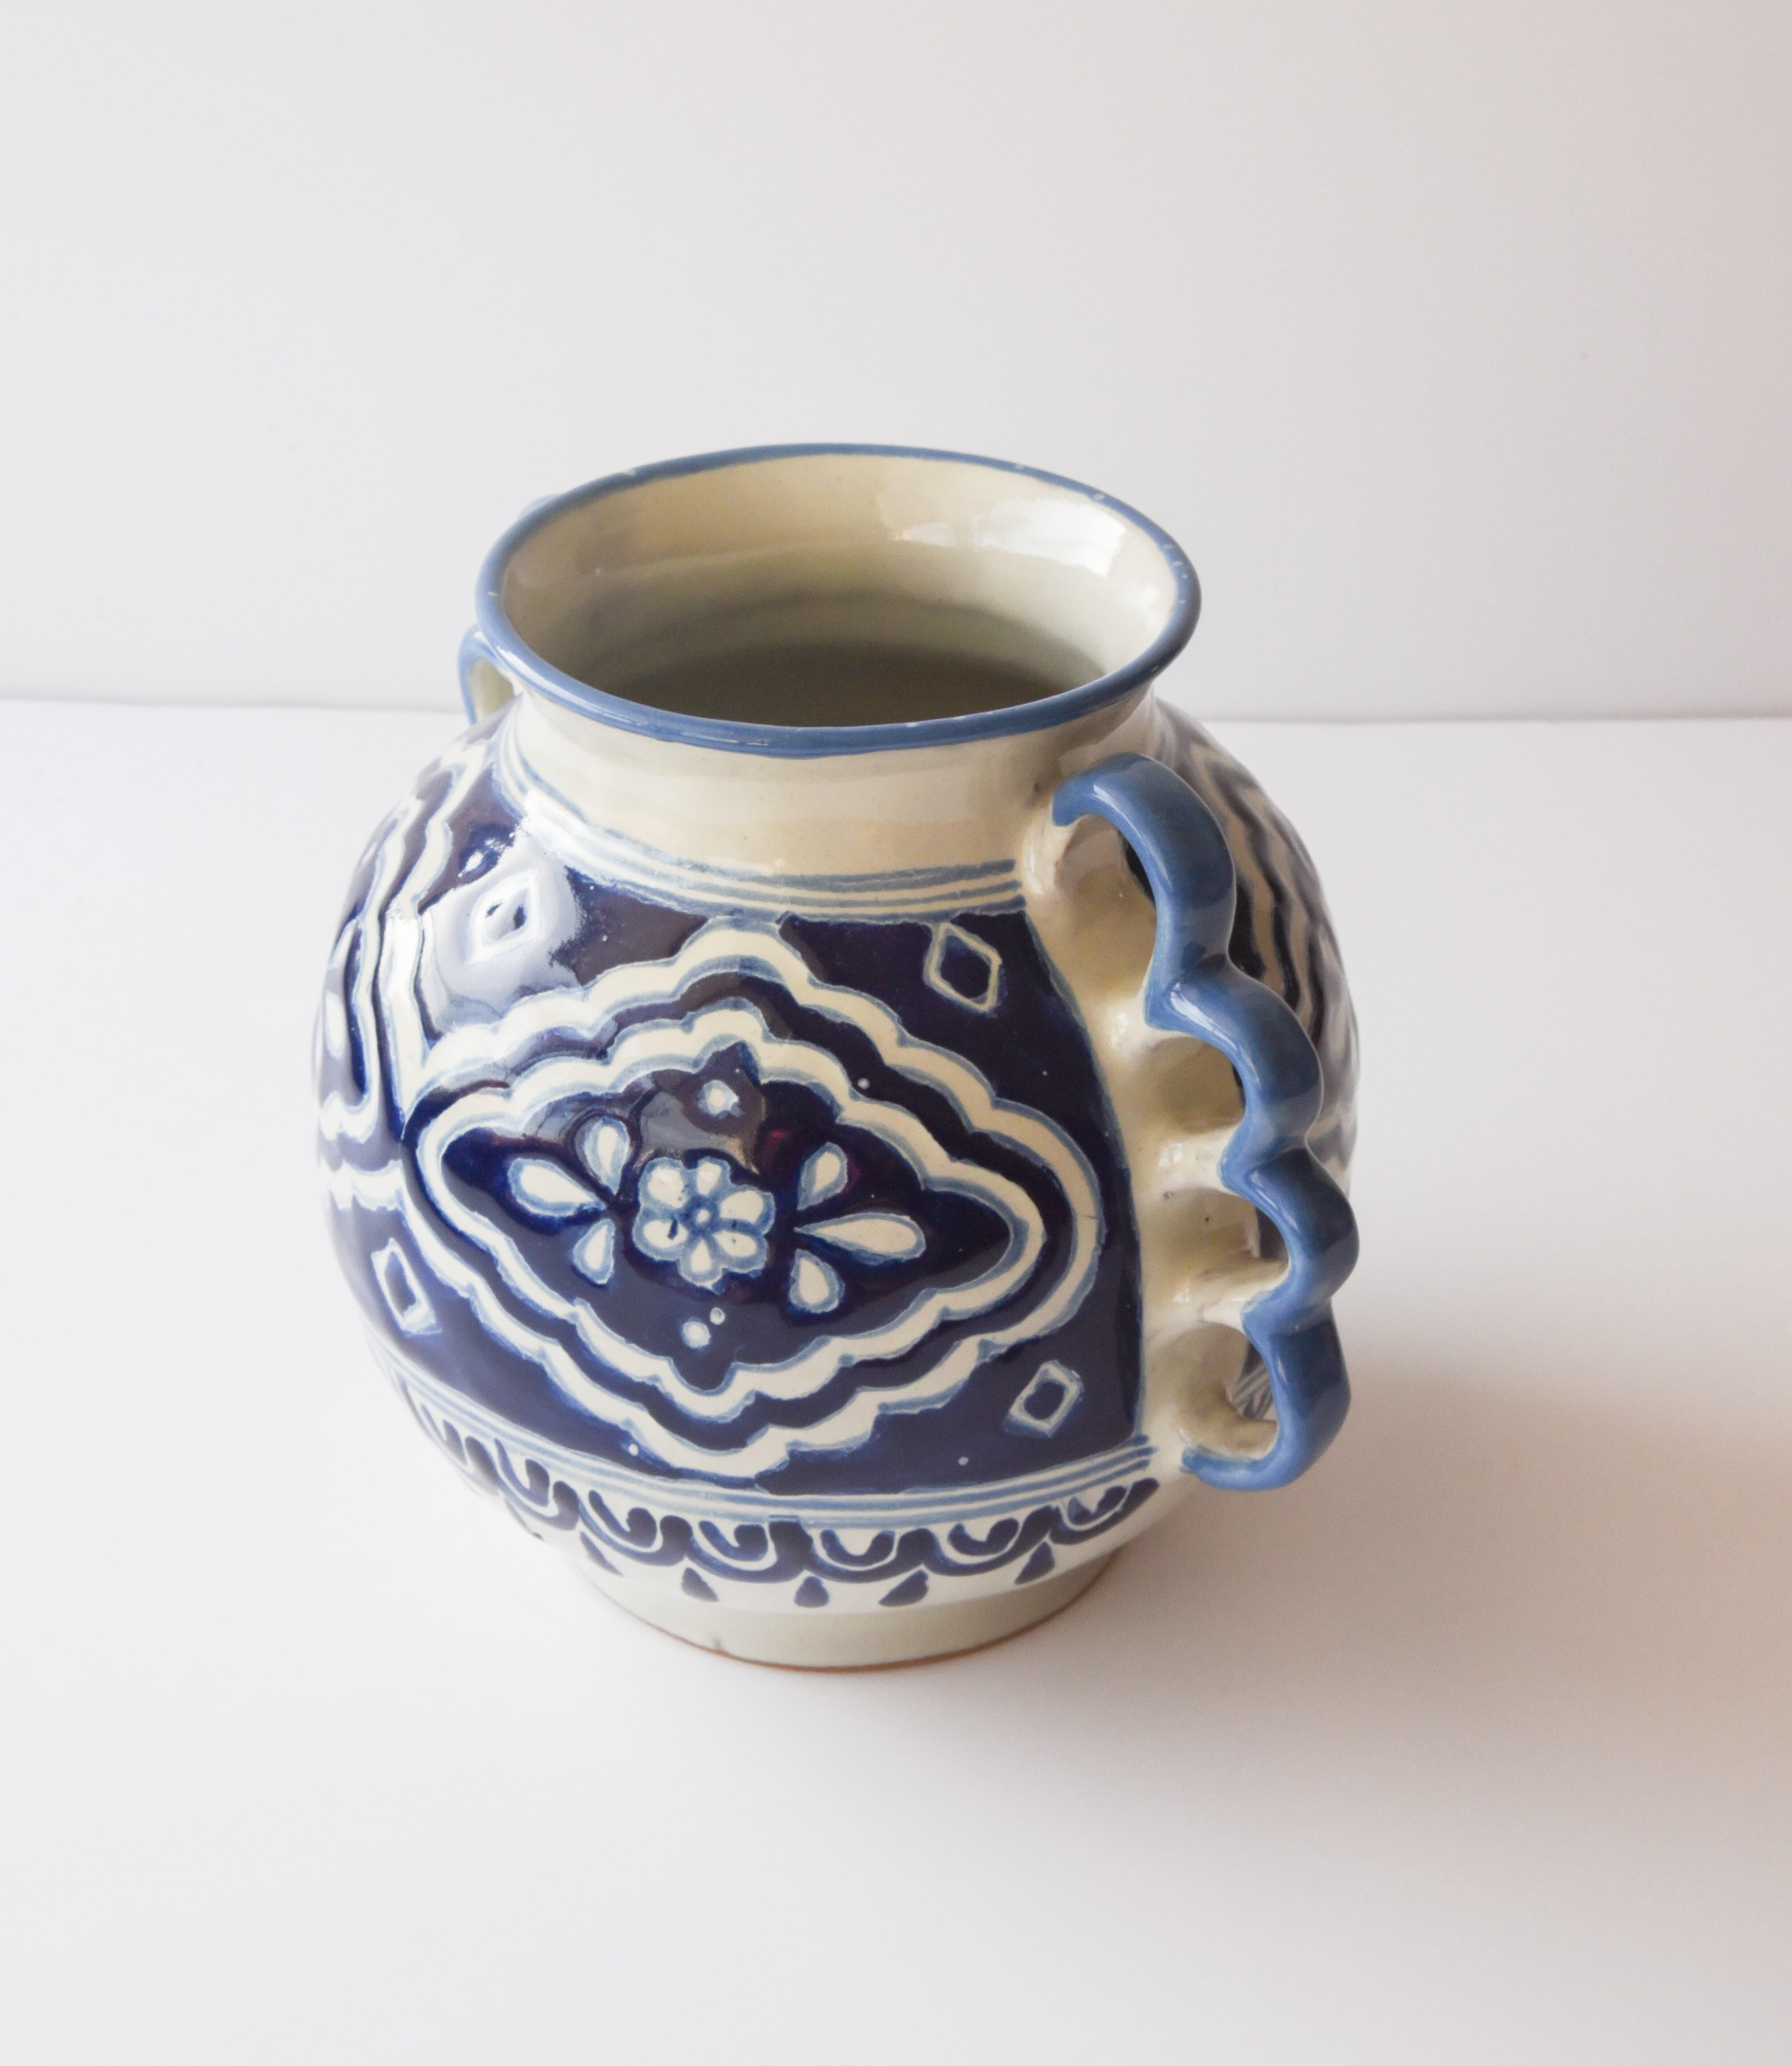 The Talavera is not just a simple painted ceramic: its exquisite decoration is the product of a delicate process of alchemy that translates into fine enamels.

In Puebla, Mexico few people still produce using Talavera with the ancestral